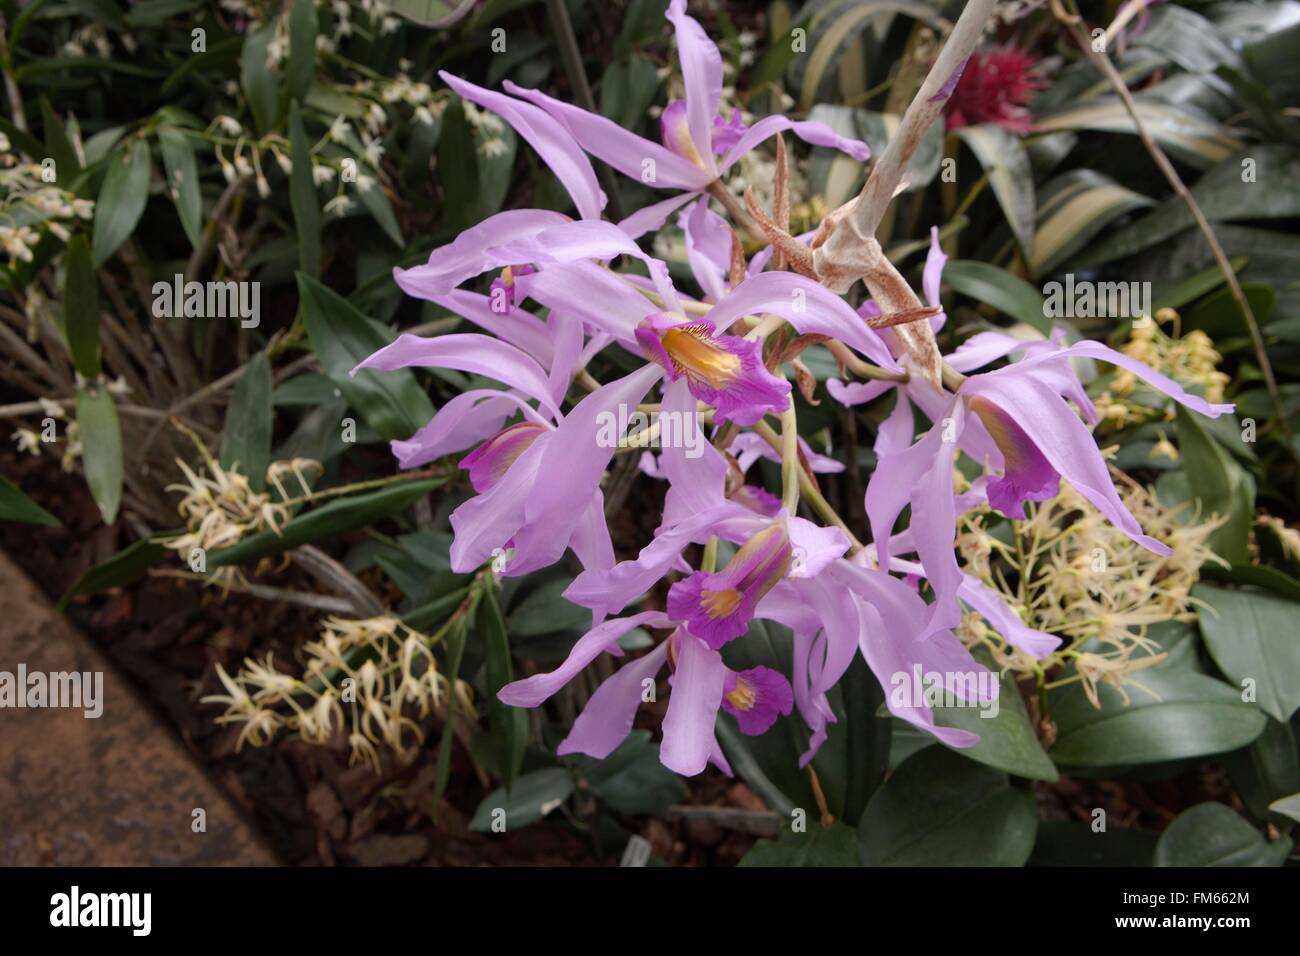 Laelia  anceps is a small genus of the orchid family, growing in the Glasshouse at RHS Wisley. Stock Photo